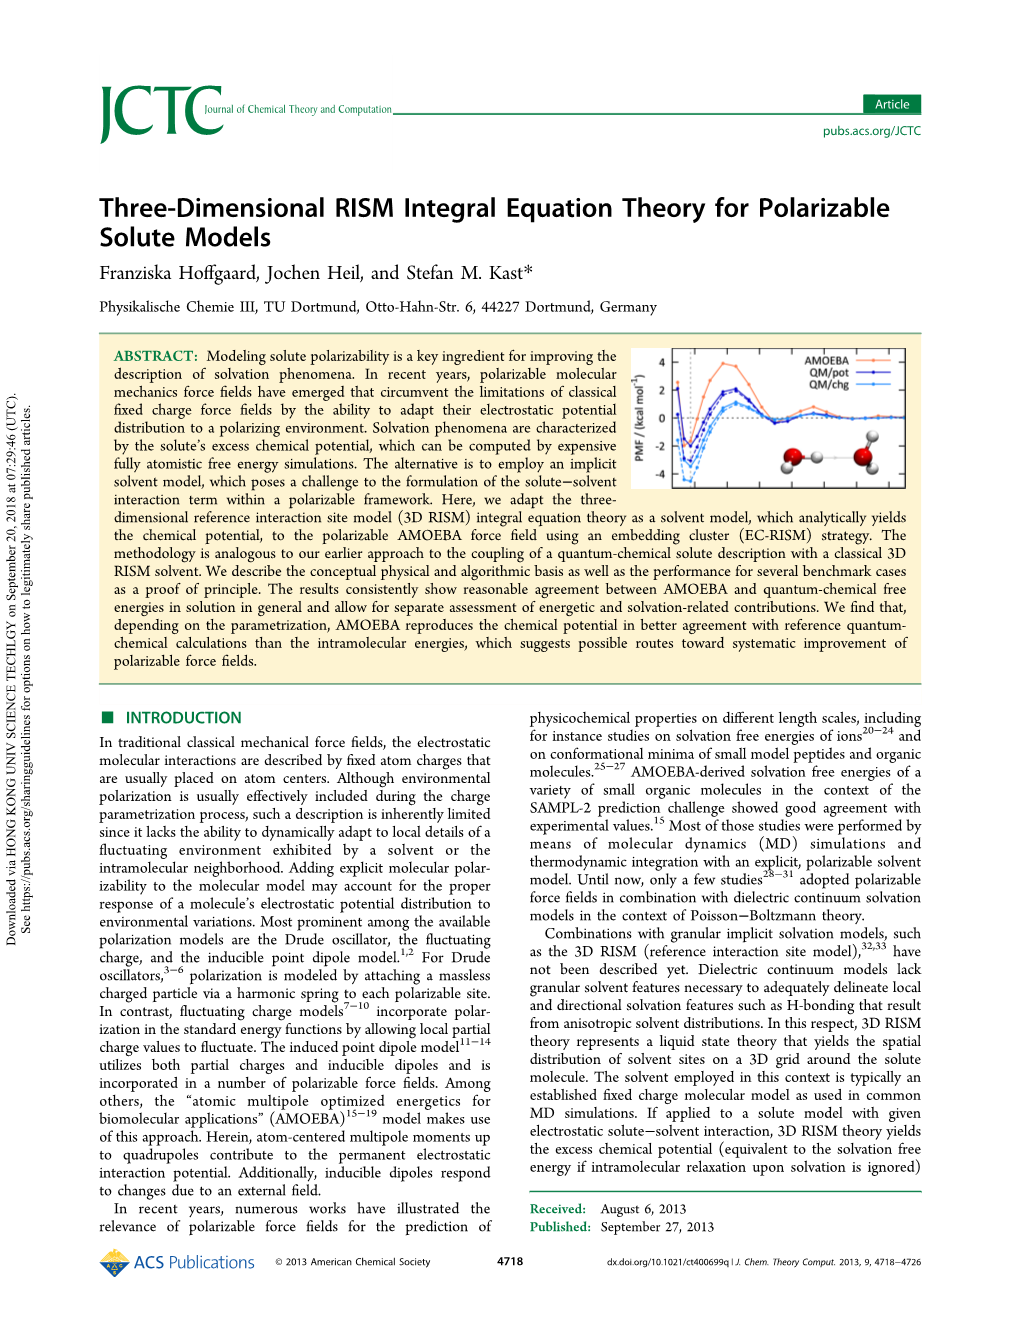 Three-Dimensional RISM Integral Equation Theory for Polarizable Solute Models Franziska Hoﬀgaard, Jochen Heil, and Stefan M